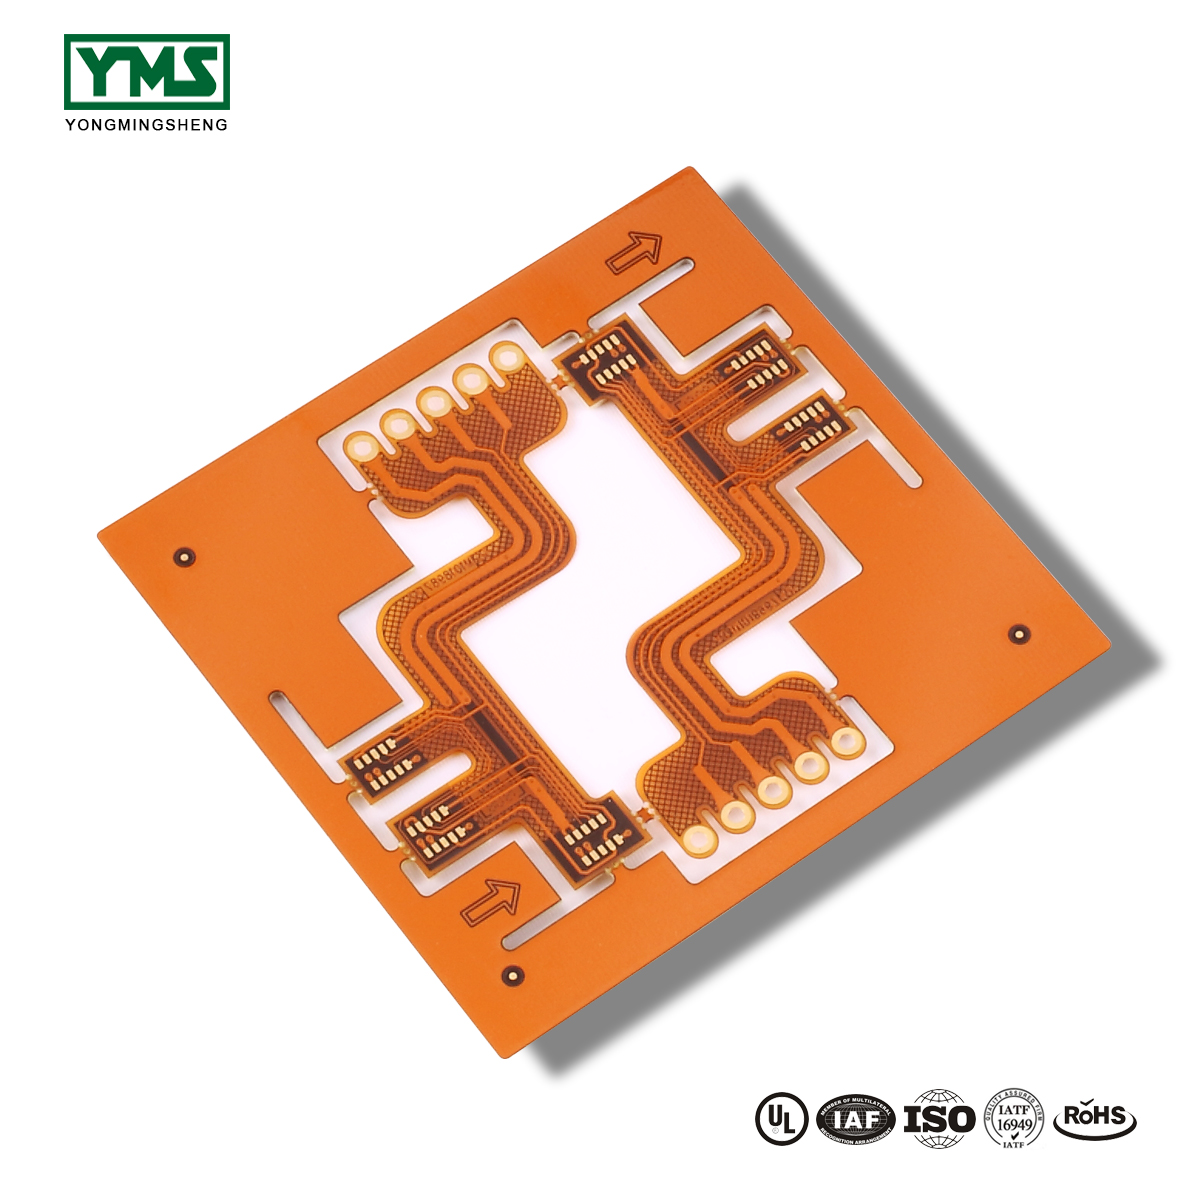 Hot sale Factory Multilayer Rigid-Flex Board - 4Layer Immersion Gold FPC | YMS PPCB – Yongmingsheng